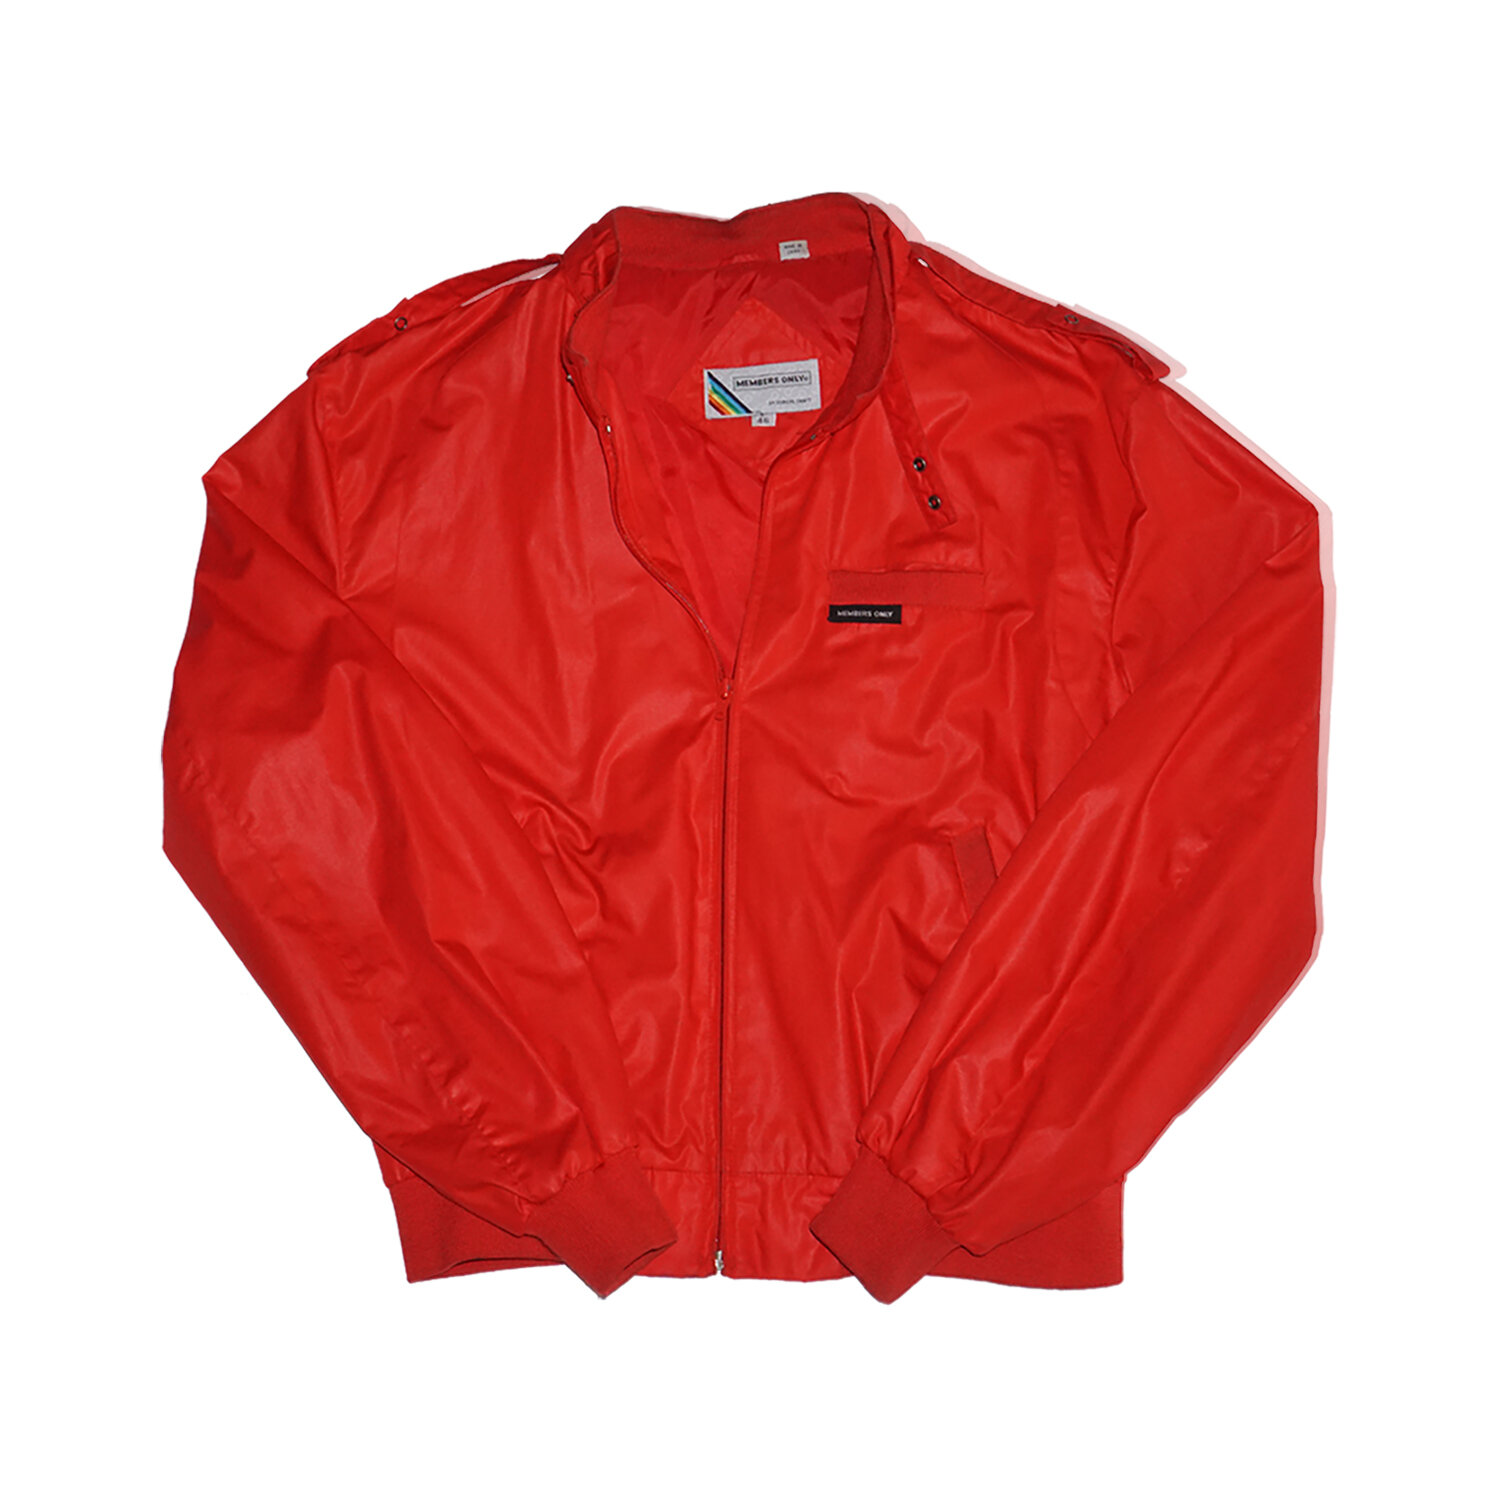 Discover more than 144 members only jacket super hot - jtcvietnam.edu.vn